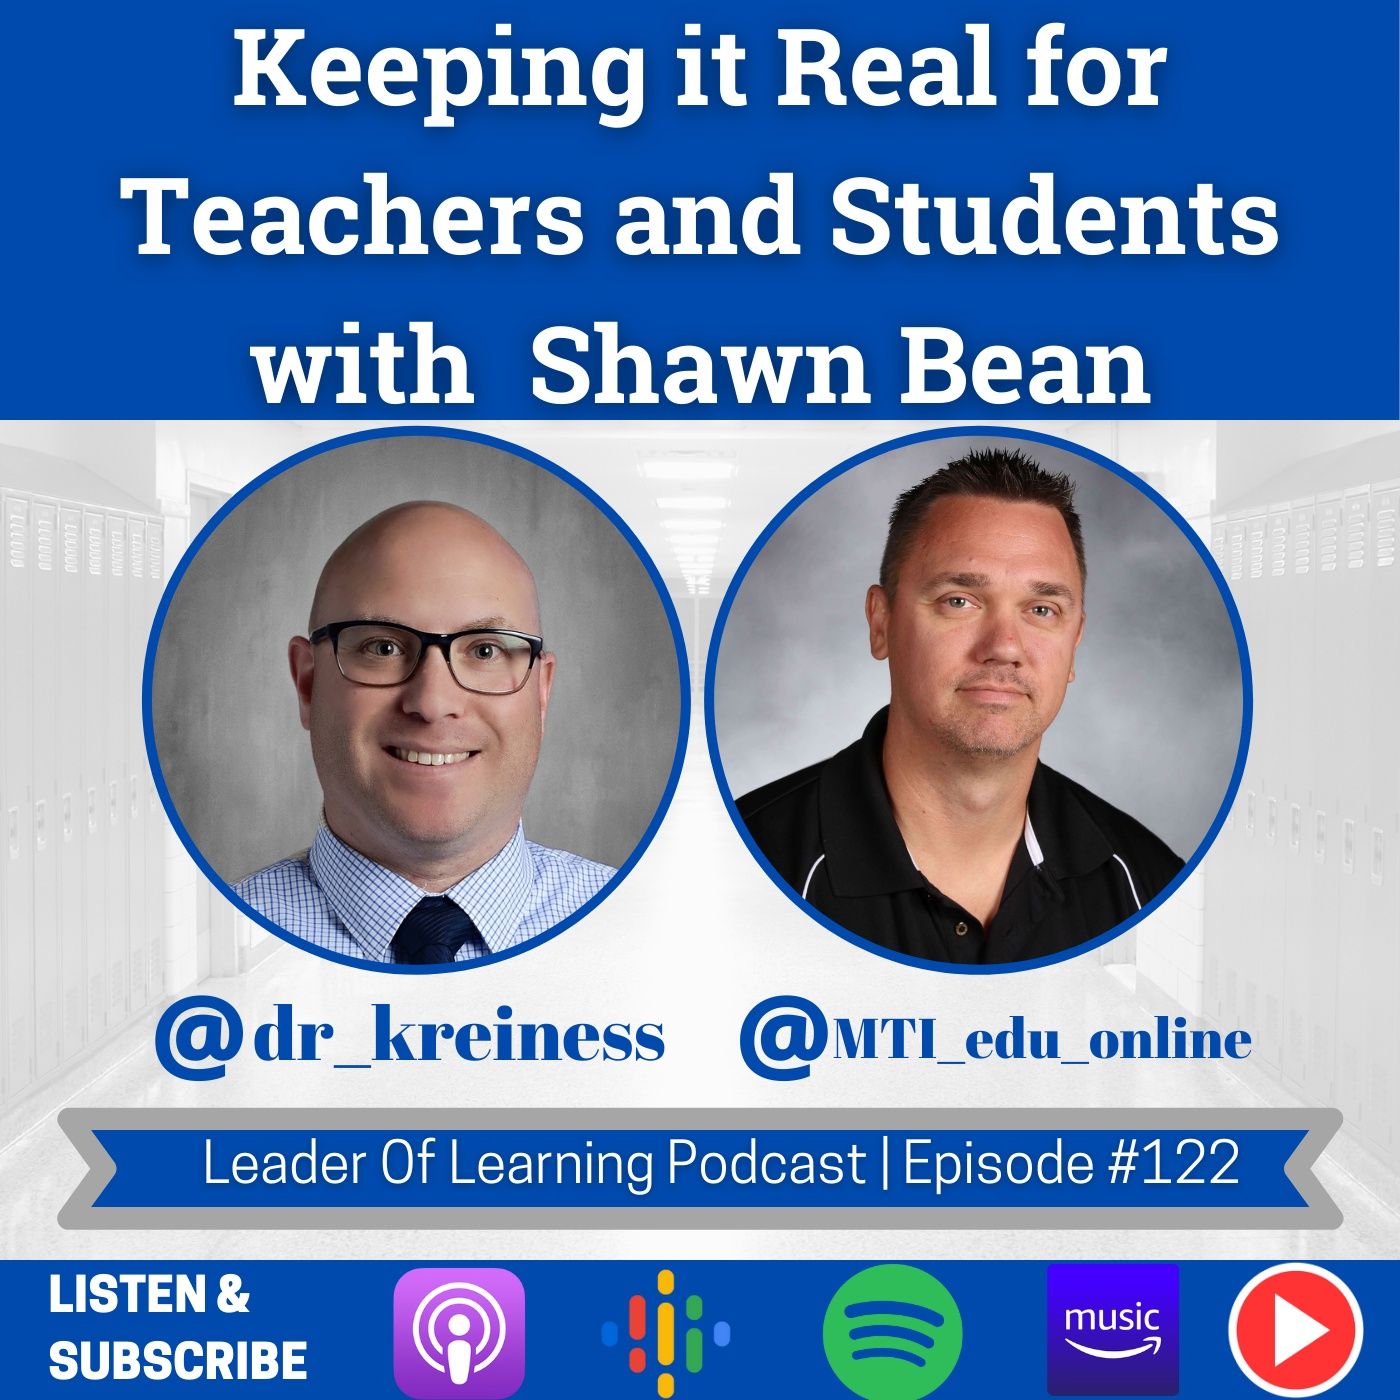 Keeping it Real with Teachers and Students with Shawn Bean Image